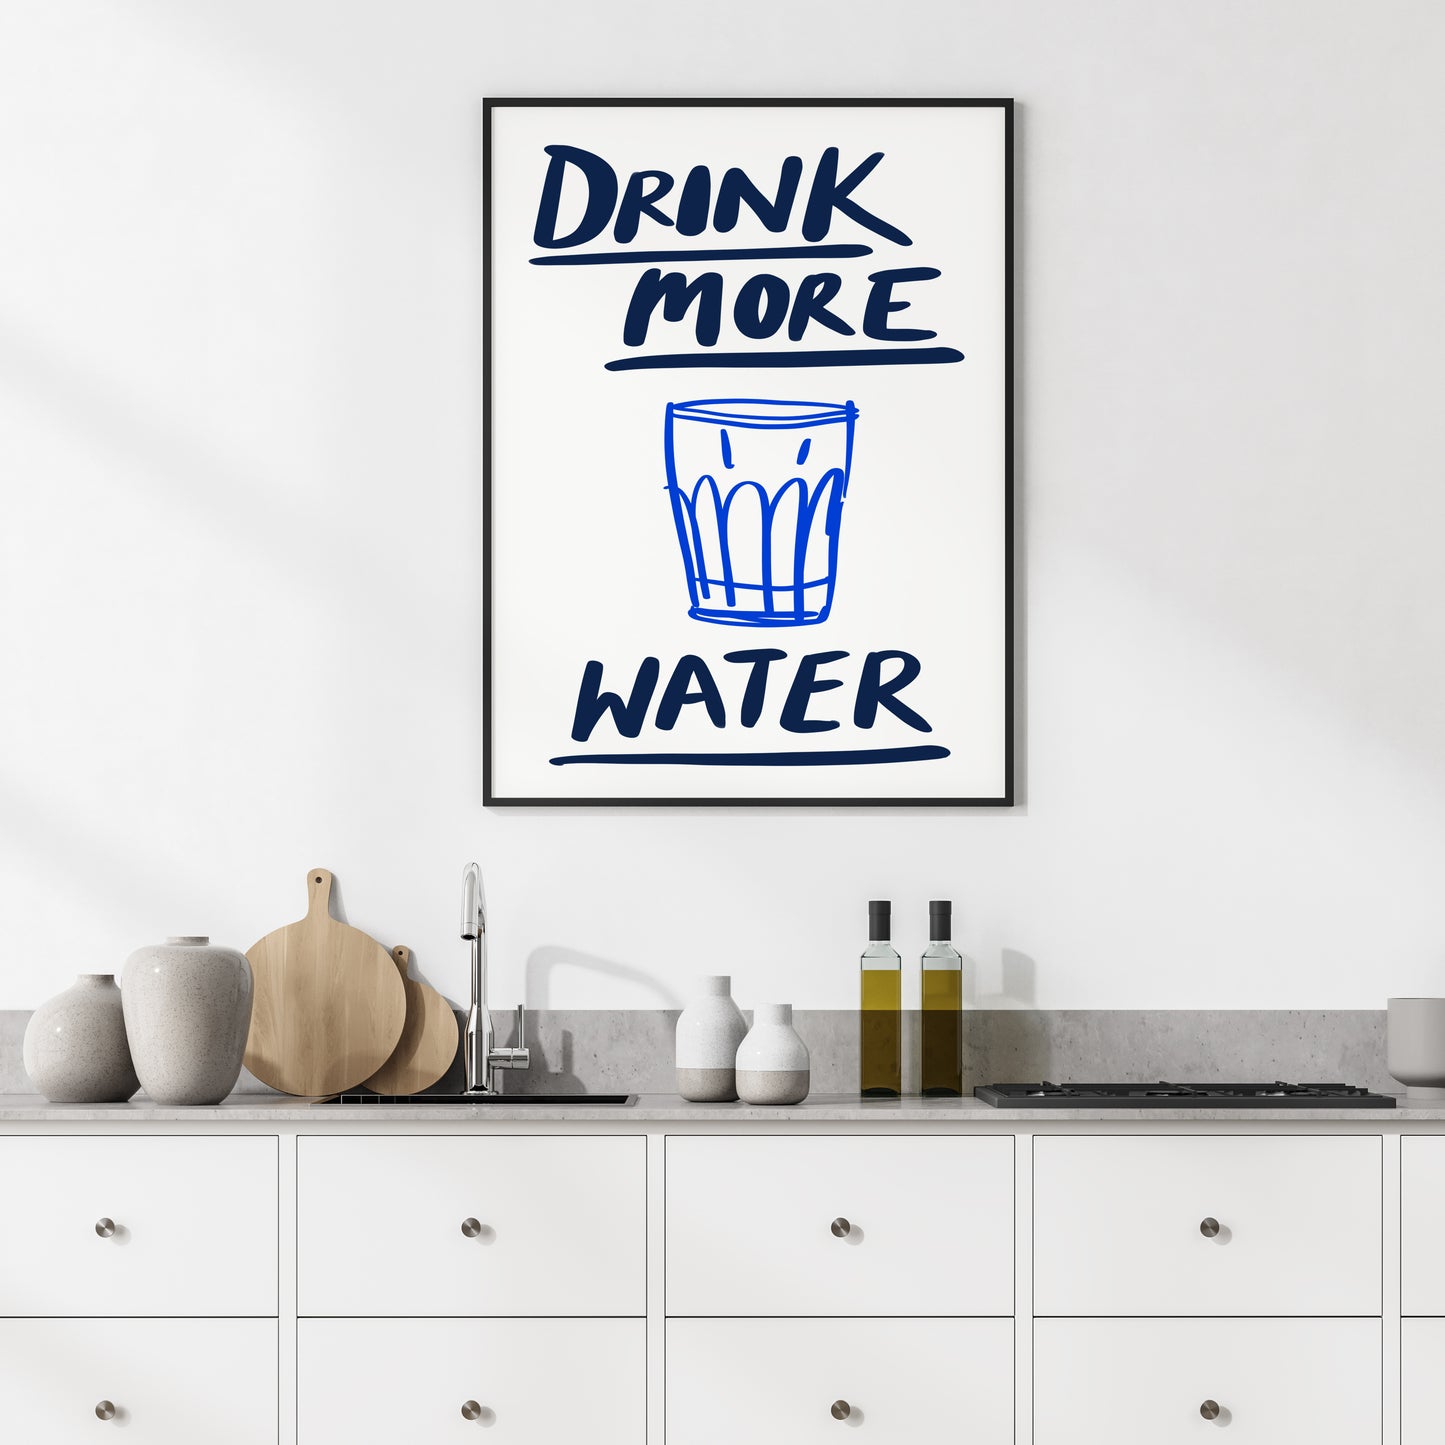 drink more water